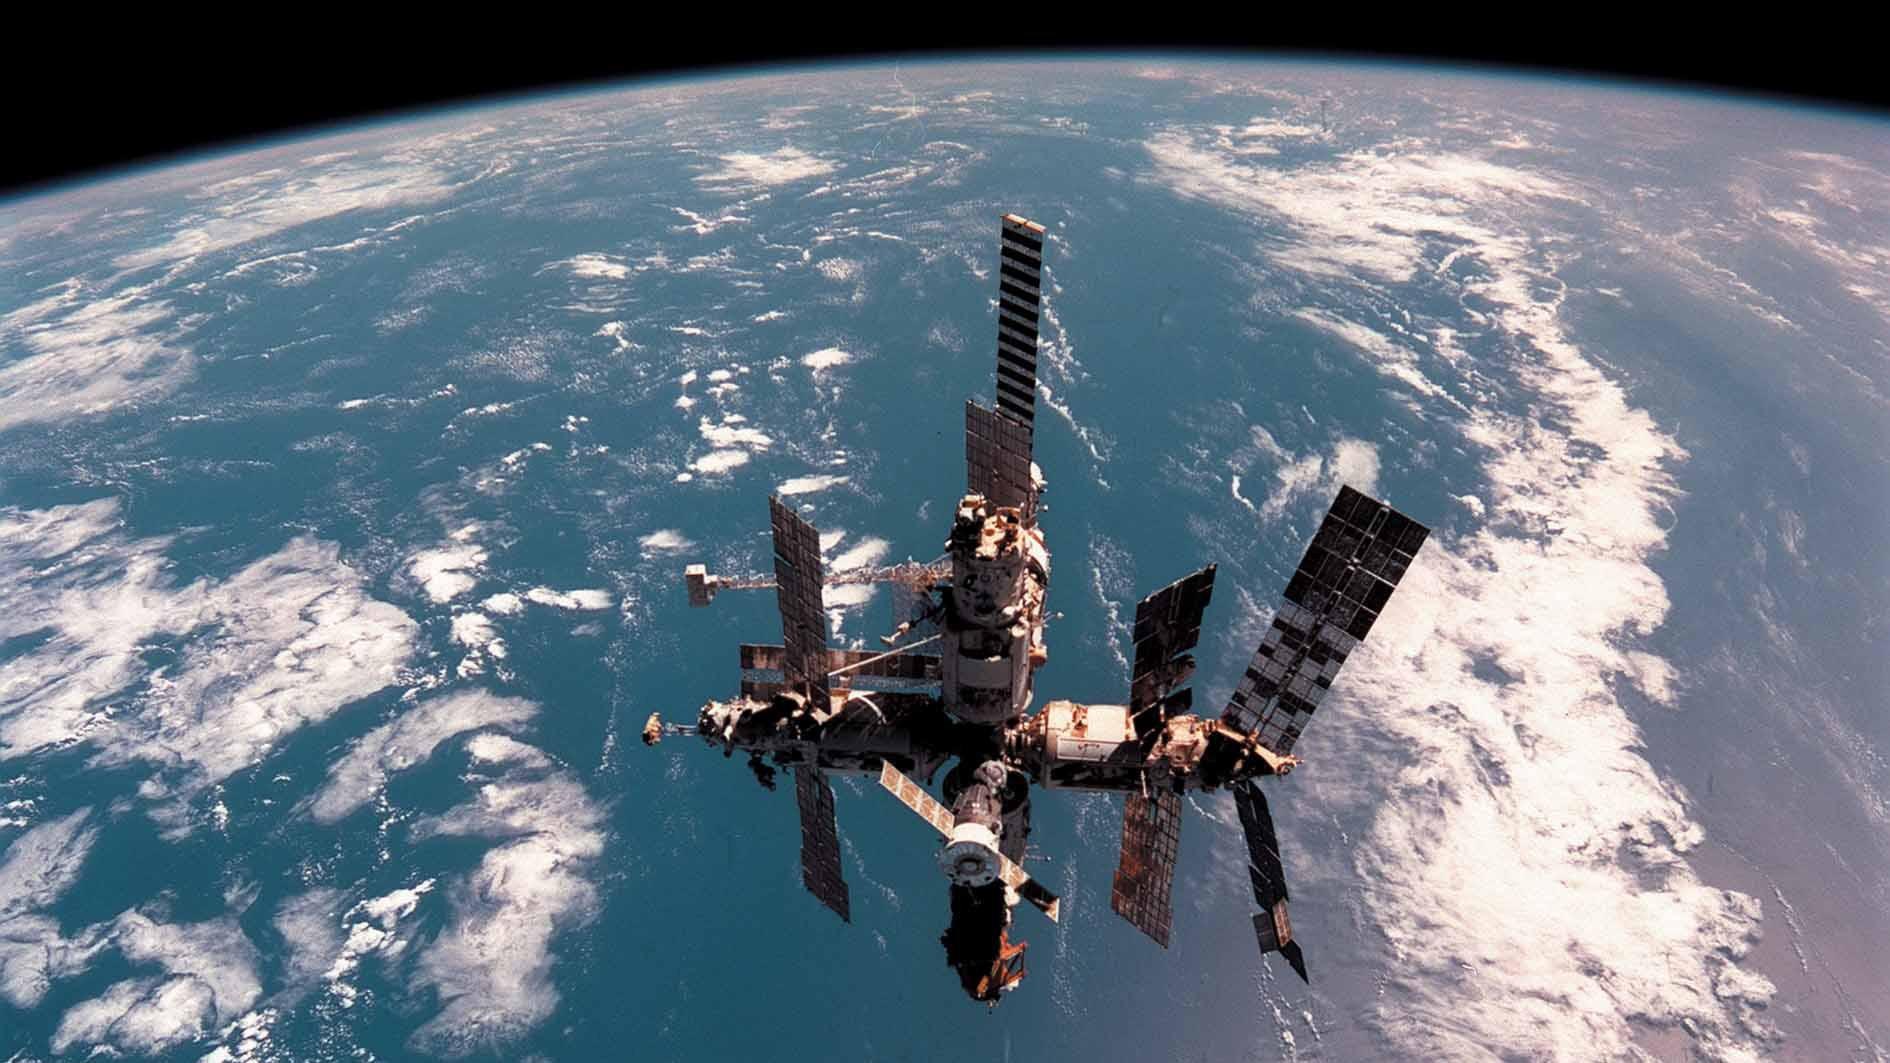 The Mir space station